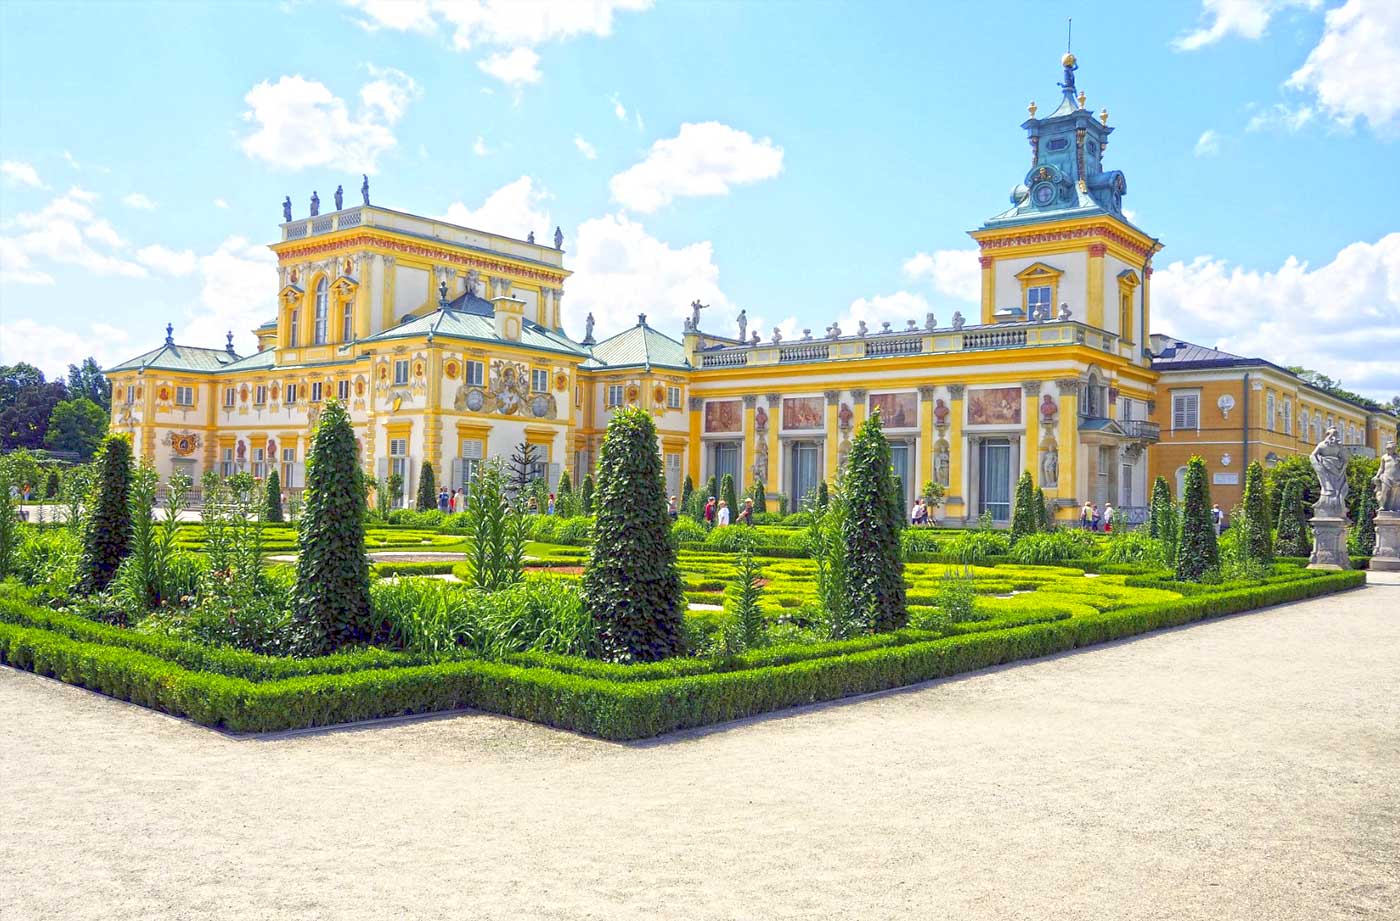 Museum of King Jan III's Palace at Wilanow